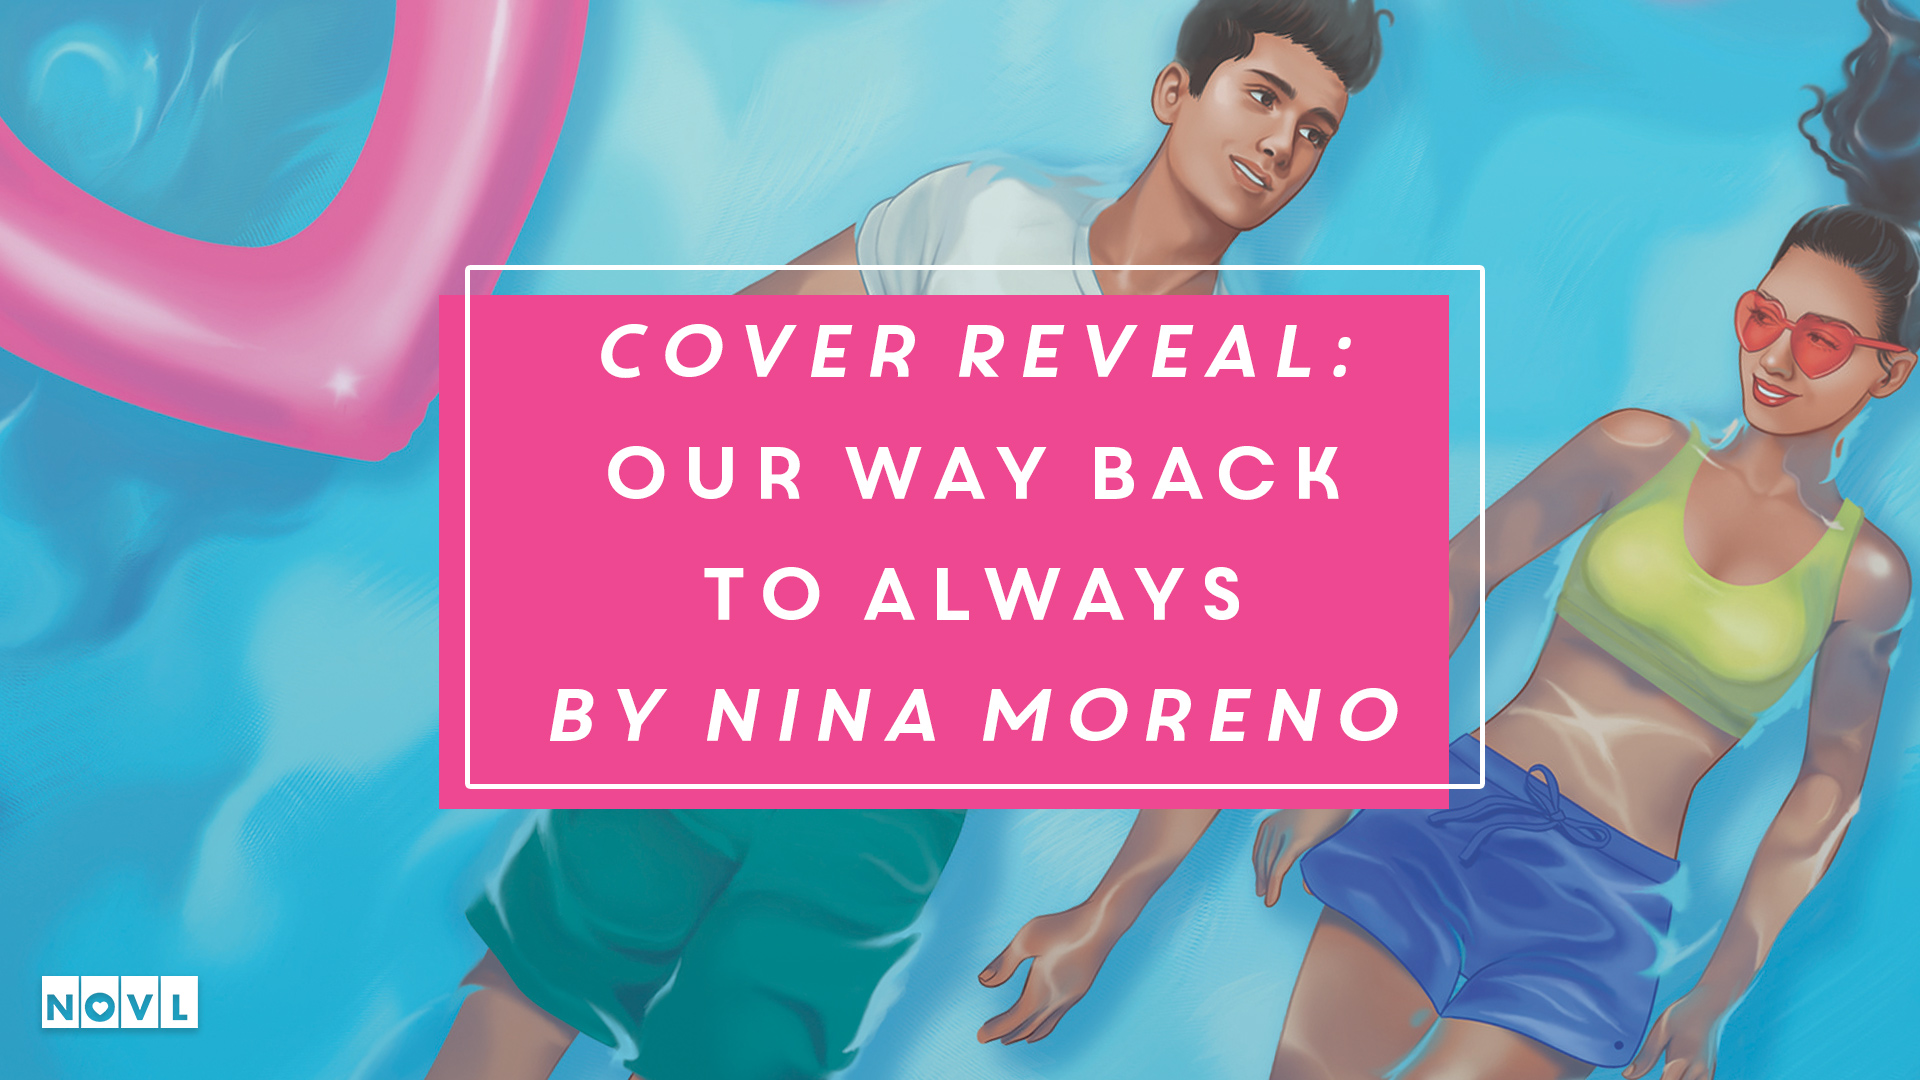 The NOVL Blog, Featured Image for Article: Cover Reveal: Our Way Back to Always by Nina Moreno